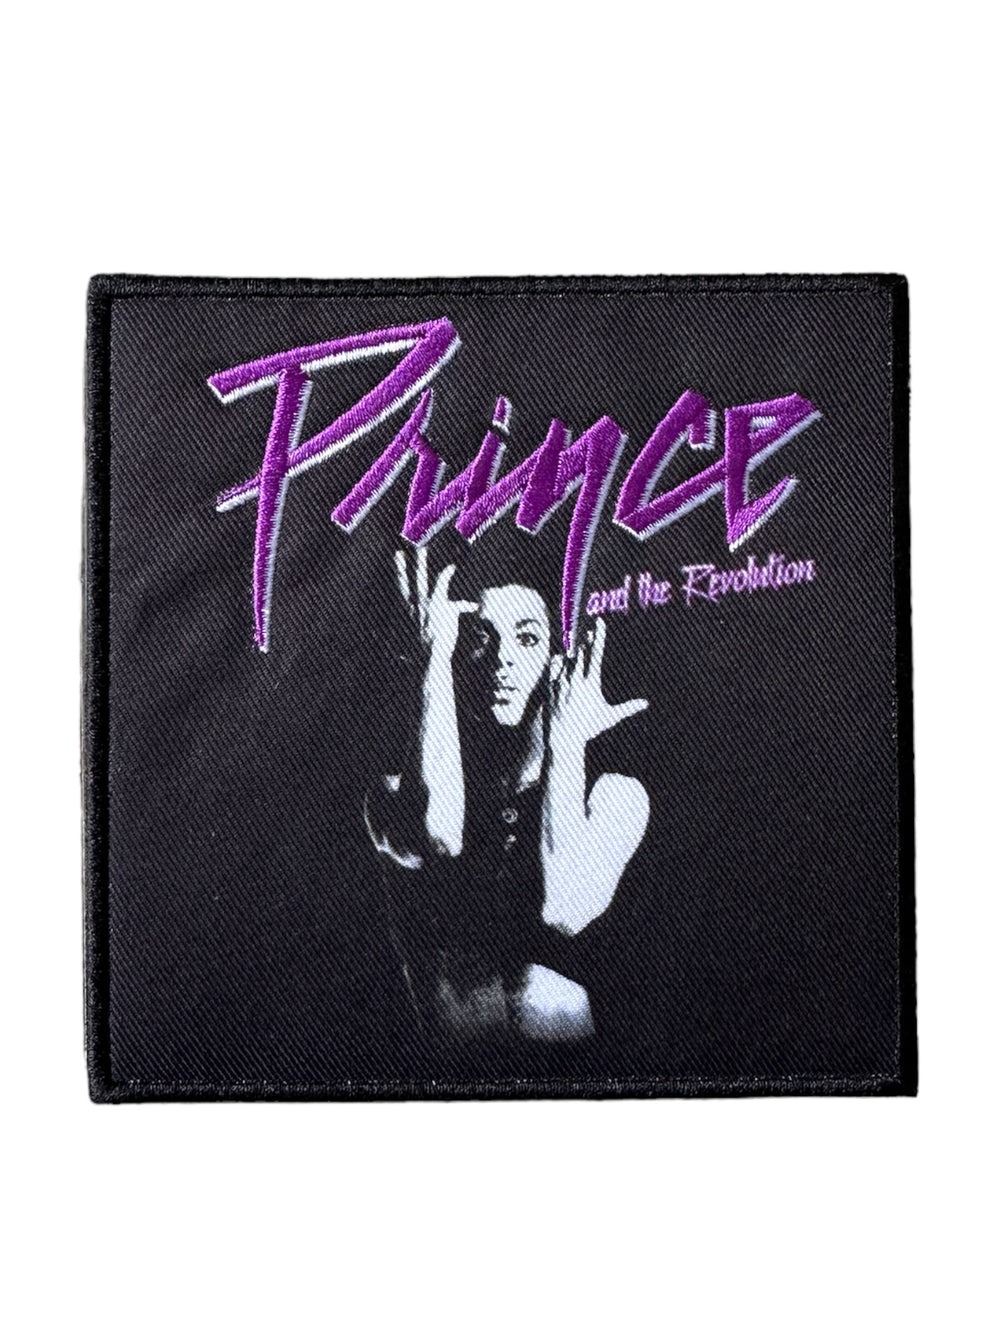 Prince - & The Revolution Official Printed & Embroidered Patch Brand New